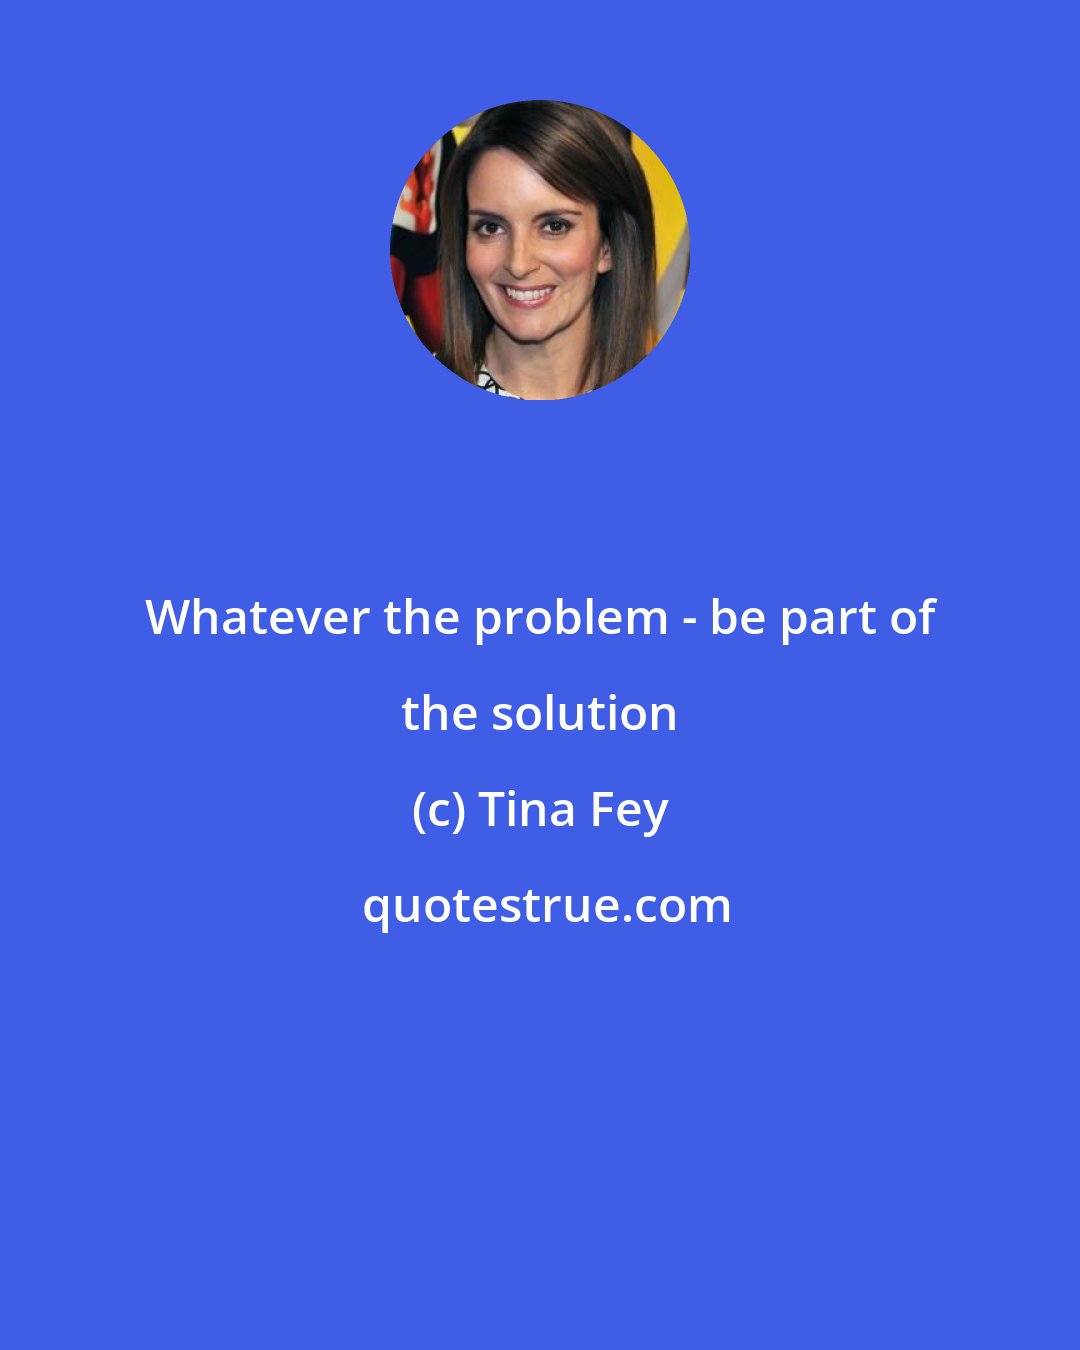 Tina Fey: Whatever the problem - be part of the solution